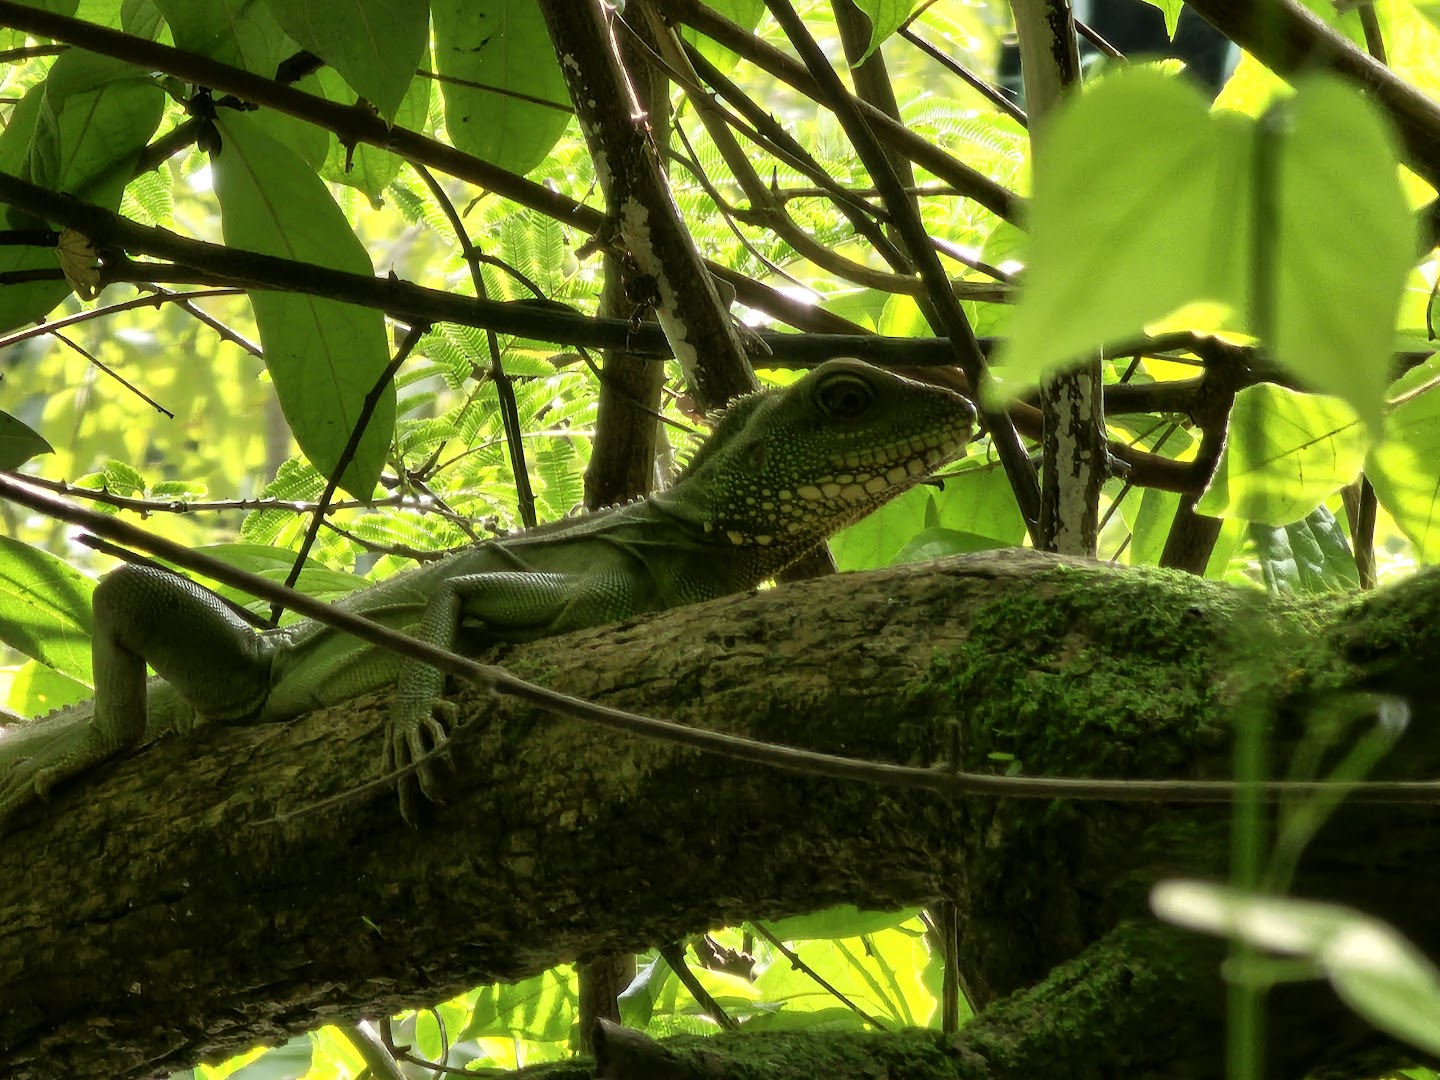 A female Green Water Dragon expertly camouflaged among green foliage